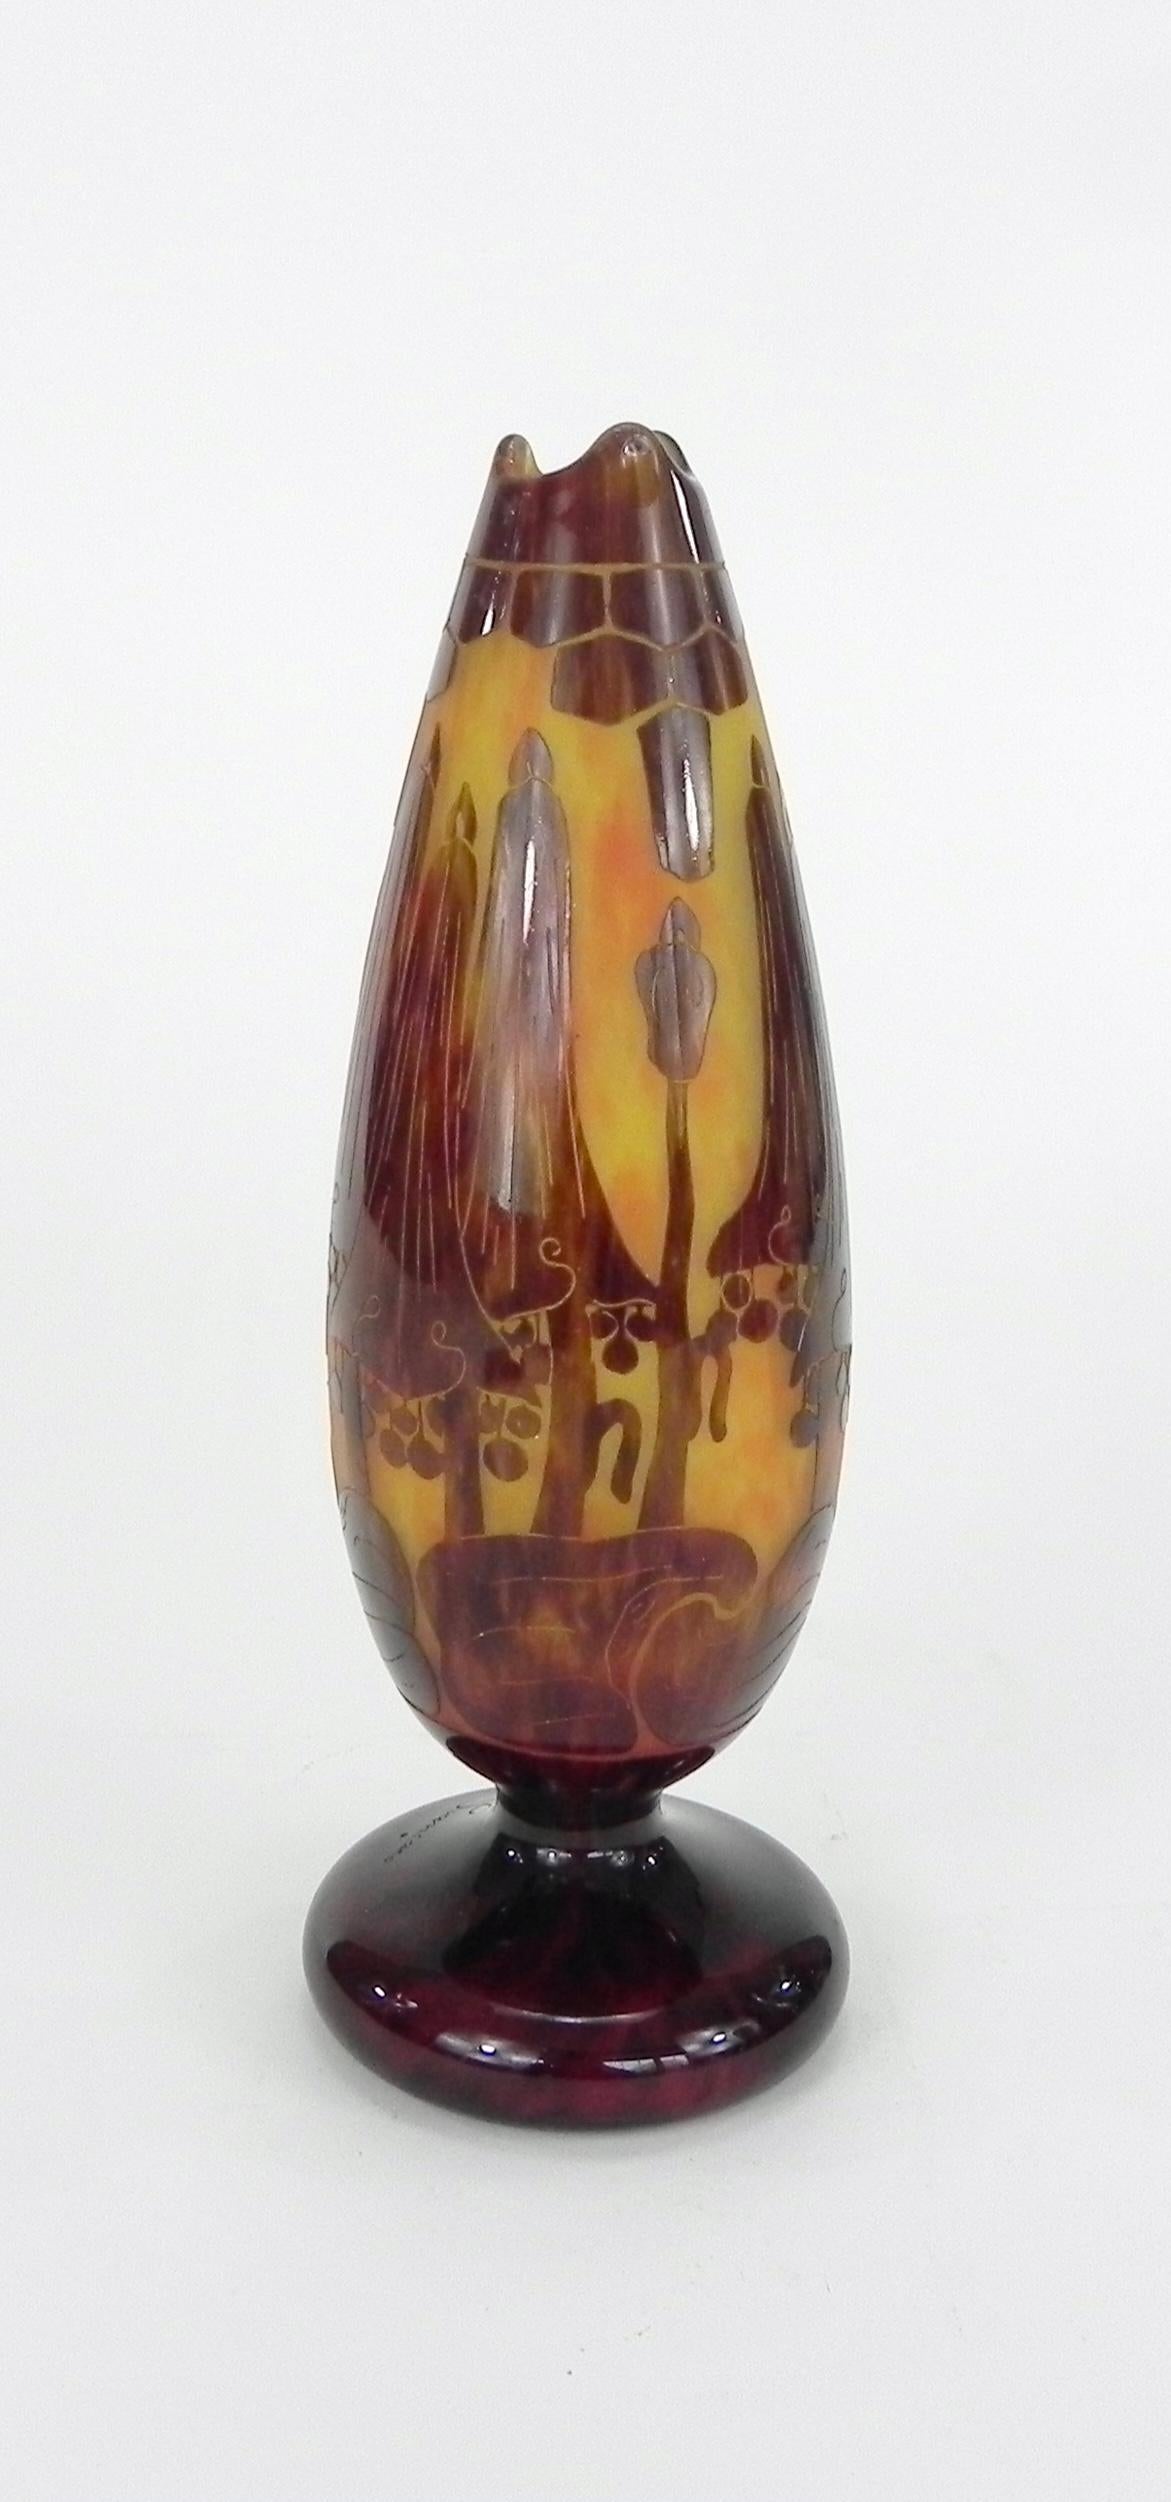 A tall “Le Verre Francais” cameo art glass vase (ca. 1922-25) decorated with bellflowers (campanulles) by the celebrated French designer Charles Schneider (1881-1953).  Executed in the Art Nouveau/Art Deco style, this acid-etched vase has the right